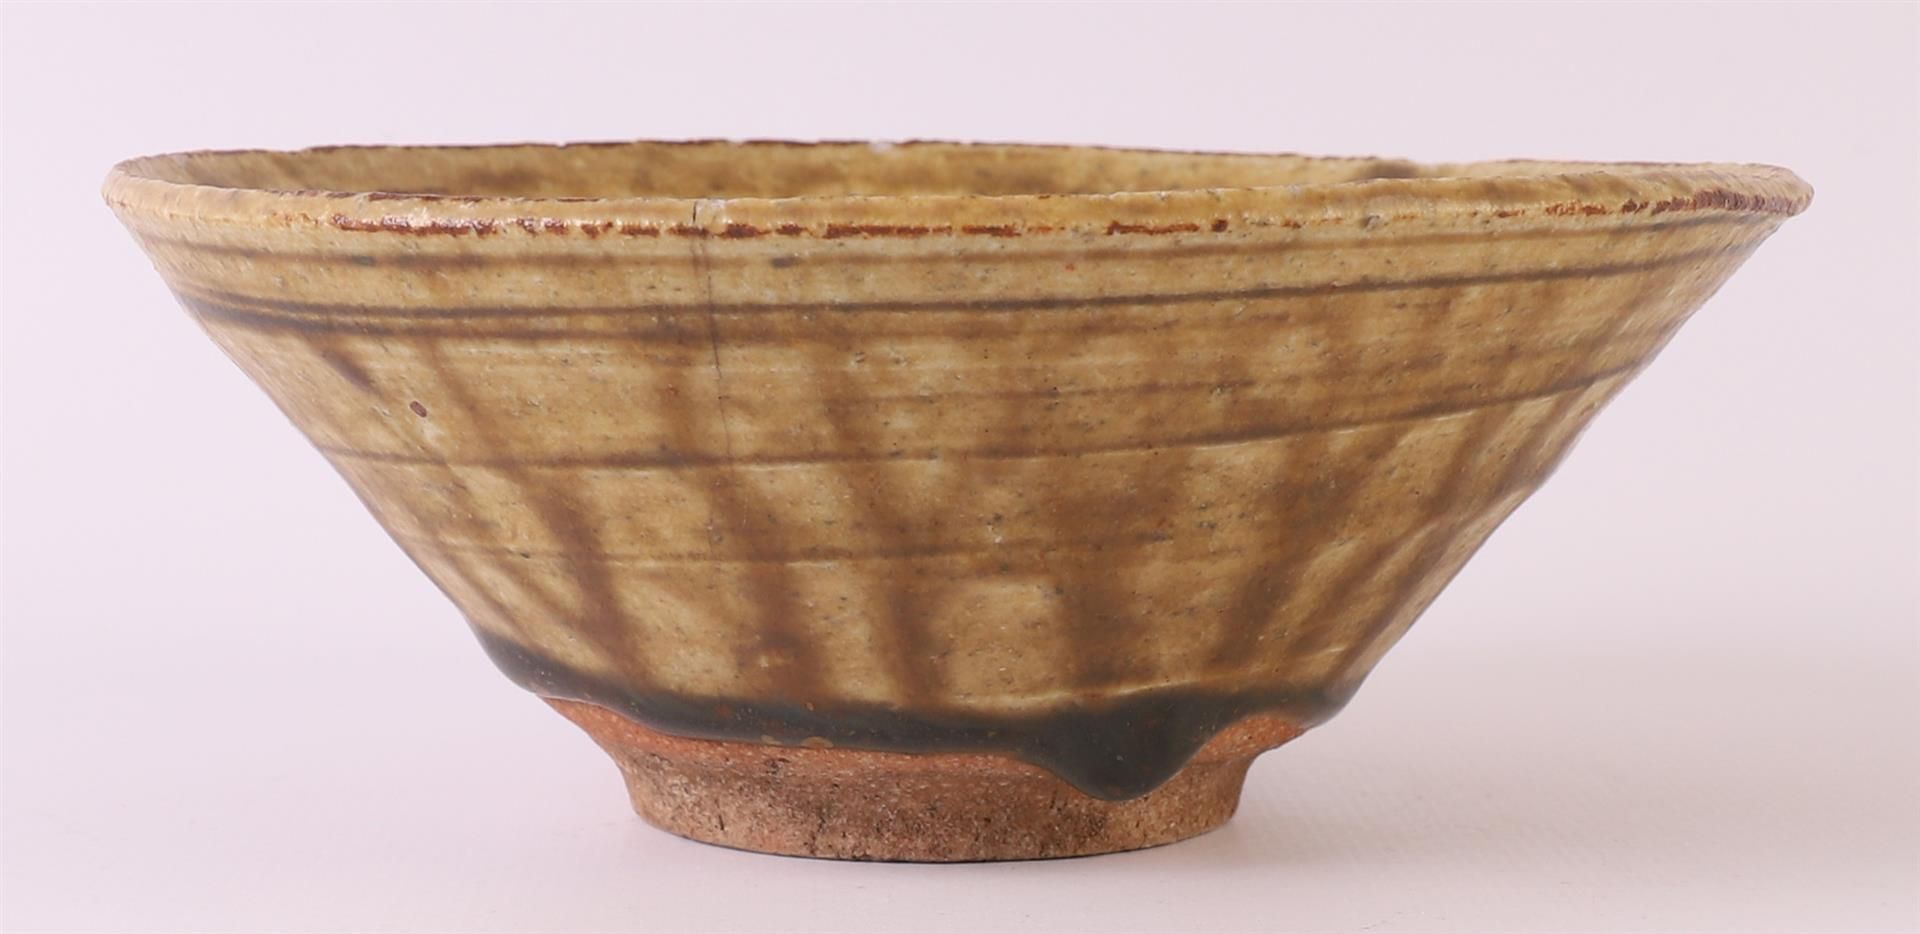 A brown glazed earthenware conical Temmoku bowl, China, Song dynasty - Image 5 of 8